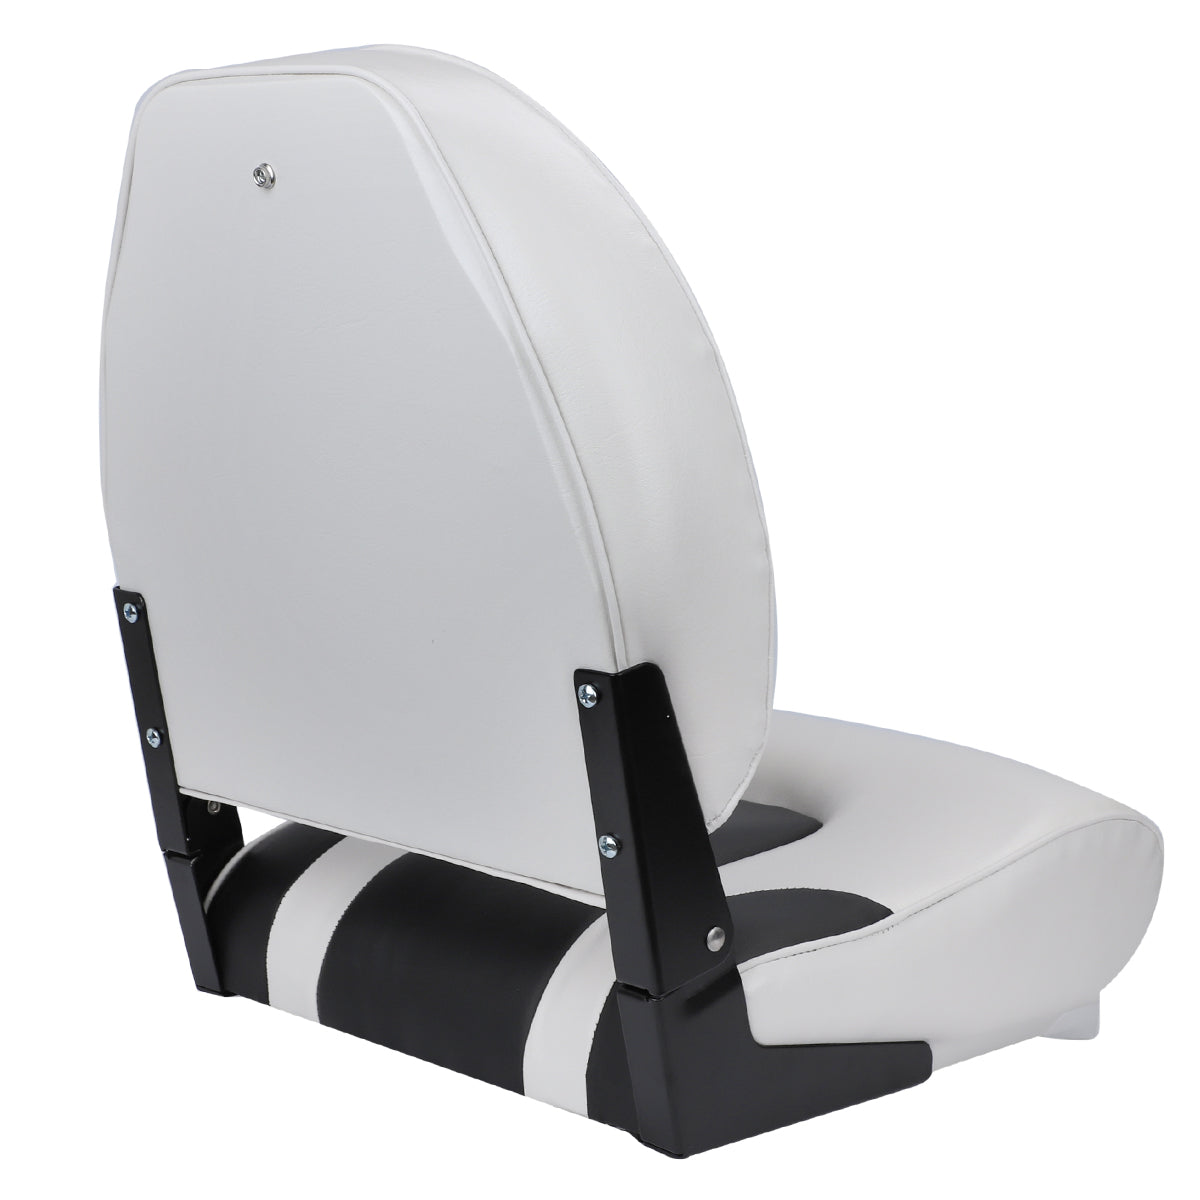 NORTHCAPTAIN C1 Deluxe High Back Folding Boat Seat,Stainless Steel Scr